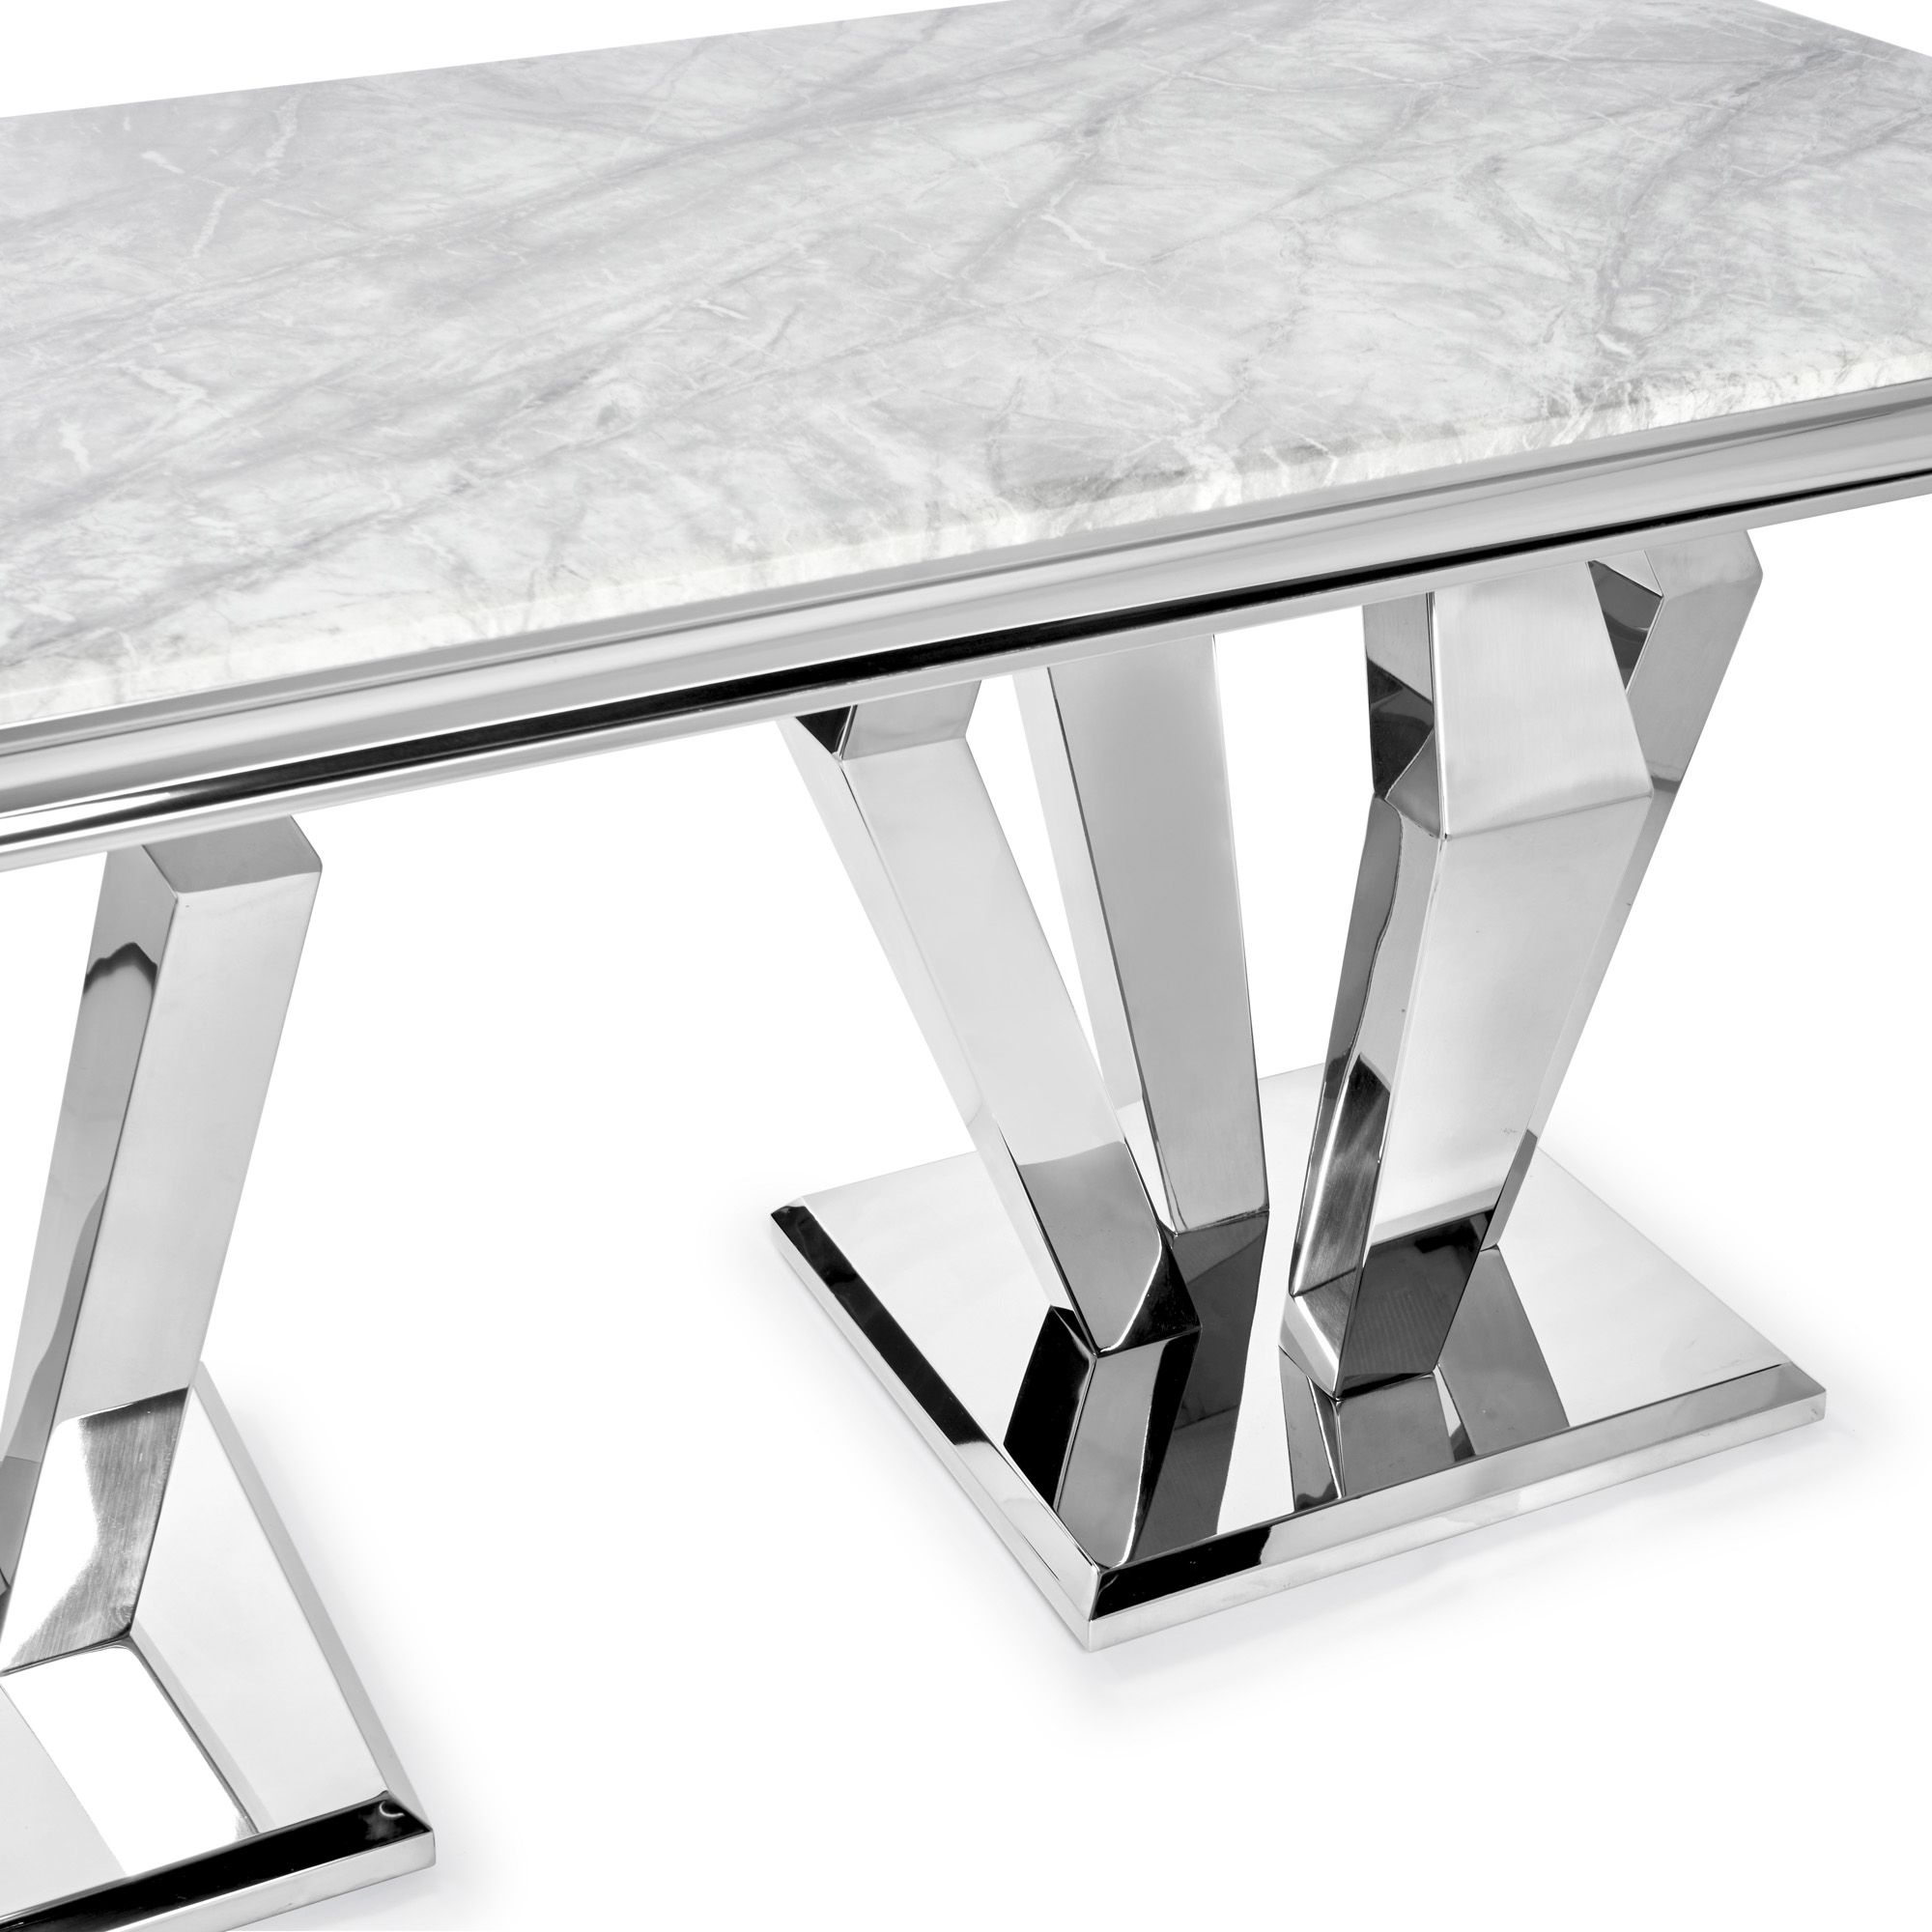 Sorrento 1.8m Polished Steel & Grey Marble Top Dining Table